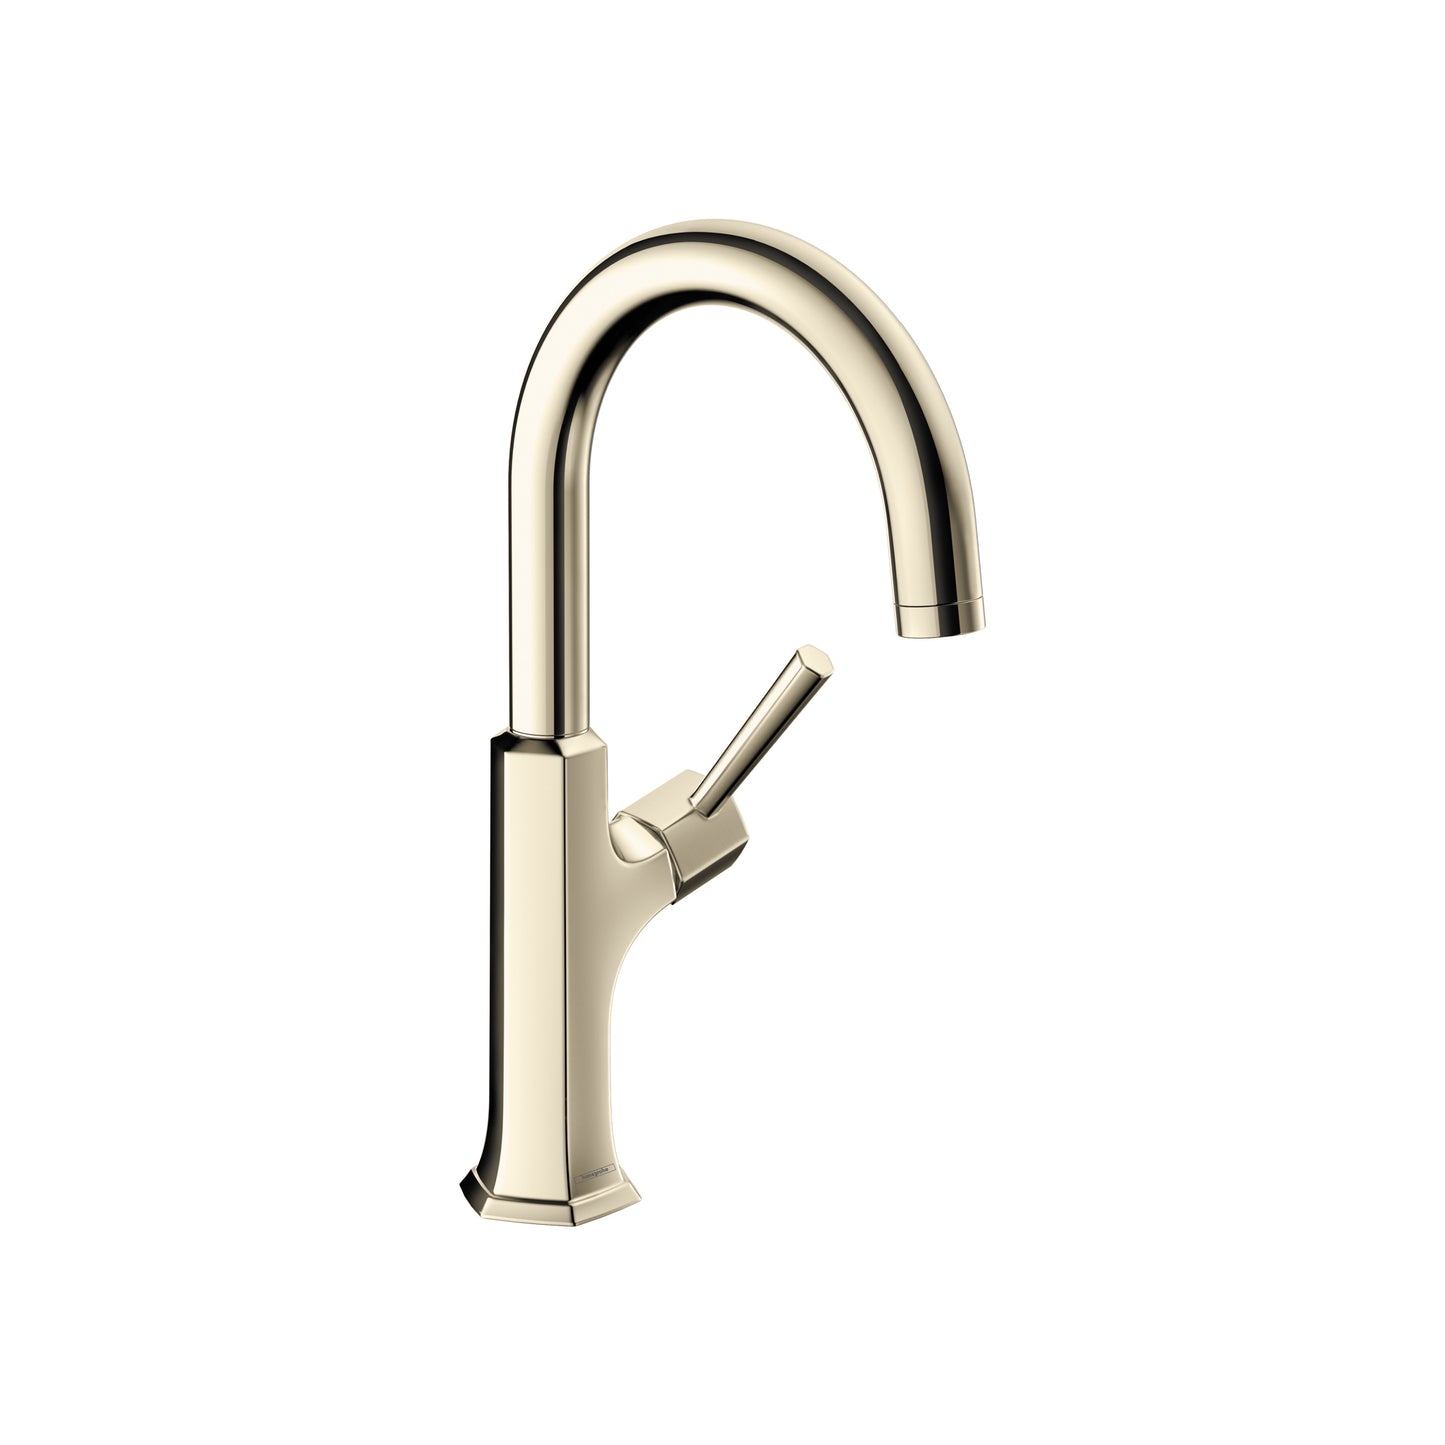 HANSGROHE 04854830 Polished Nickel Locarno Transitional Kitchen Faucet 1.5 GPM